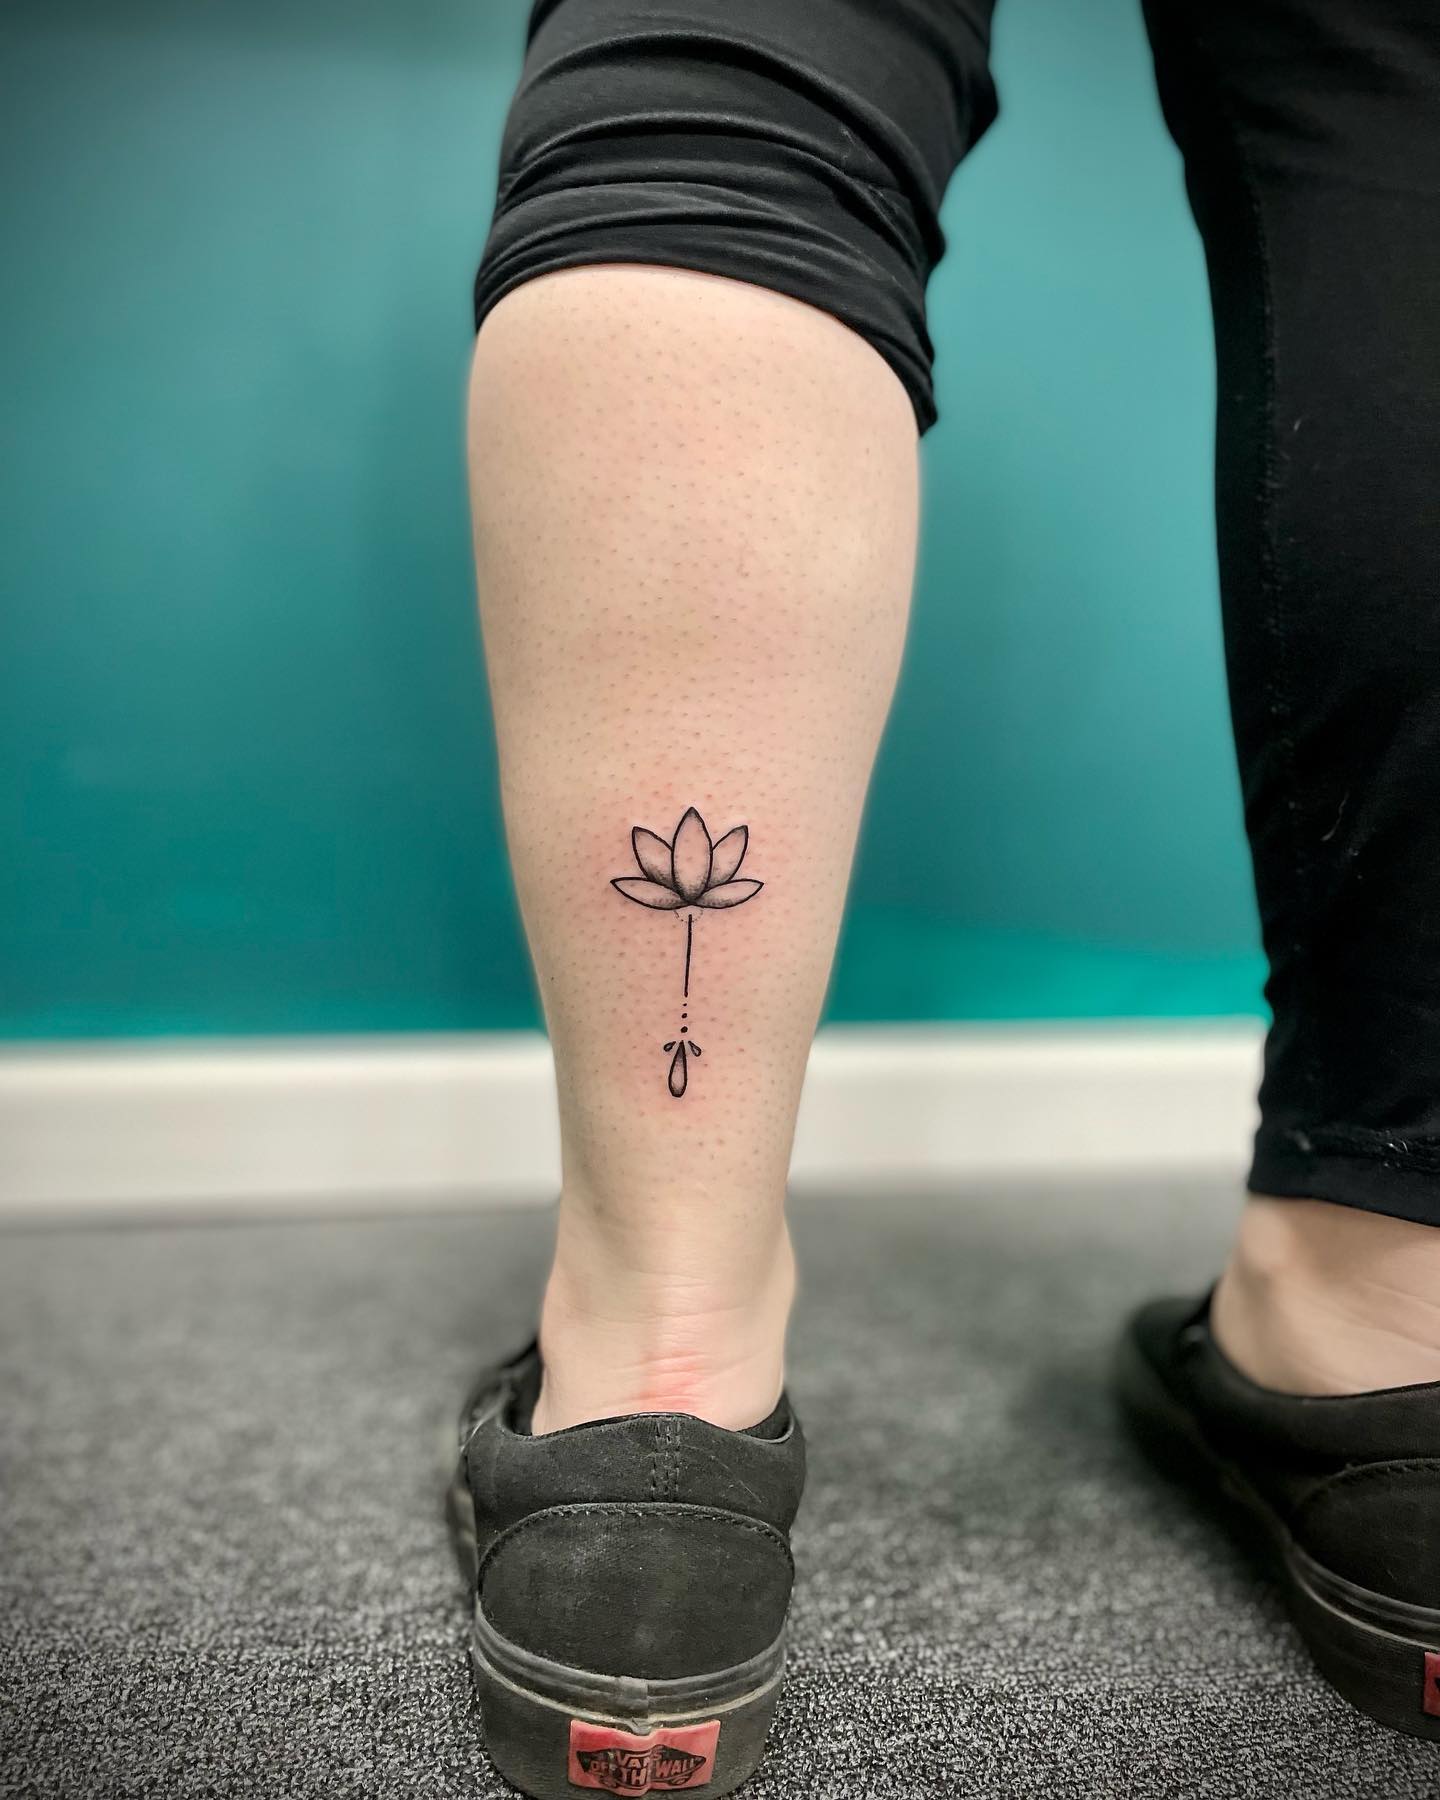 Elevate Your Ink With Timeless Lotus Blossom Flower Tattoos